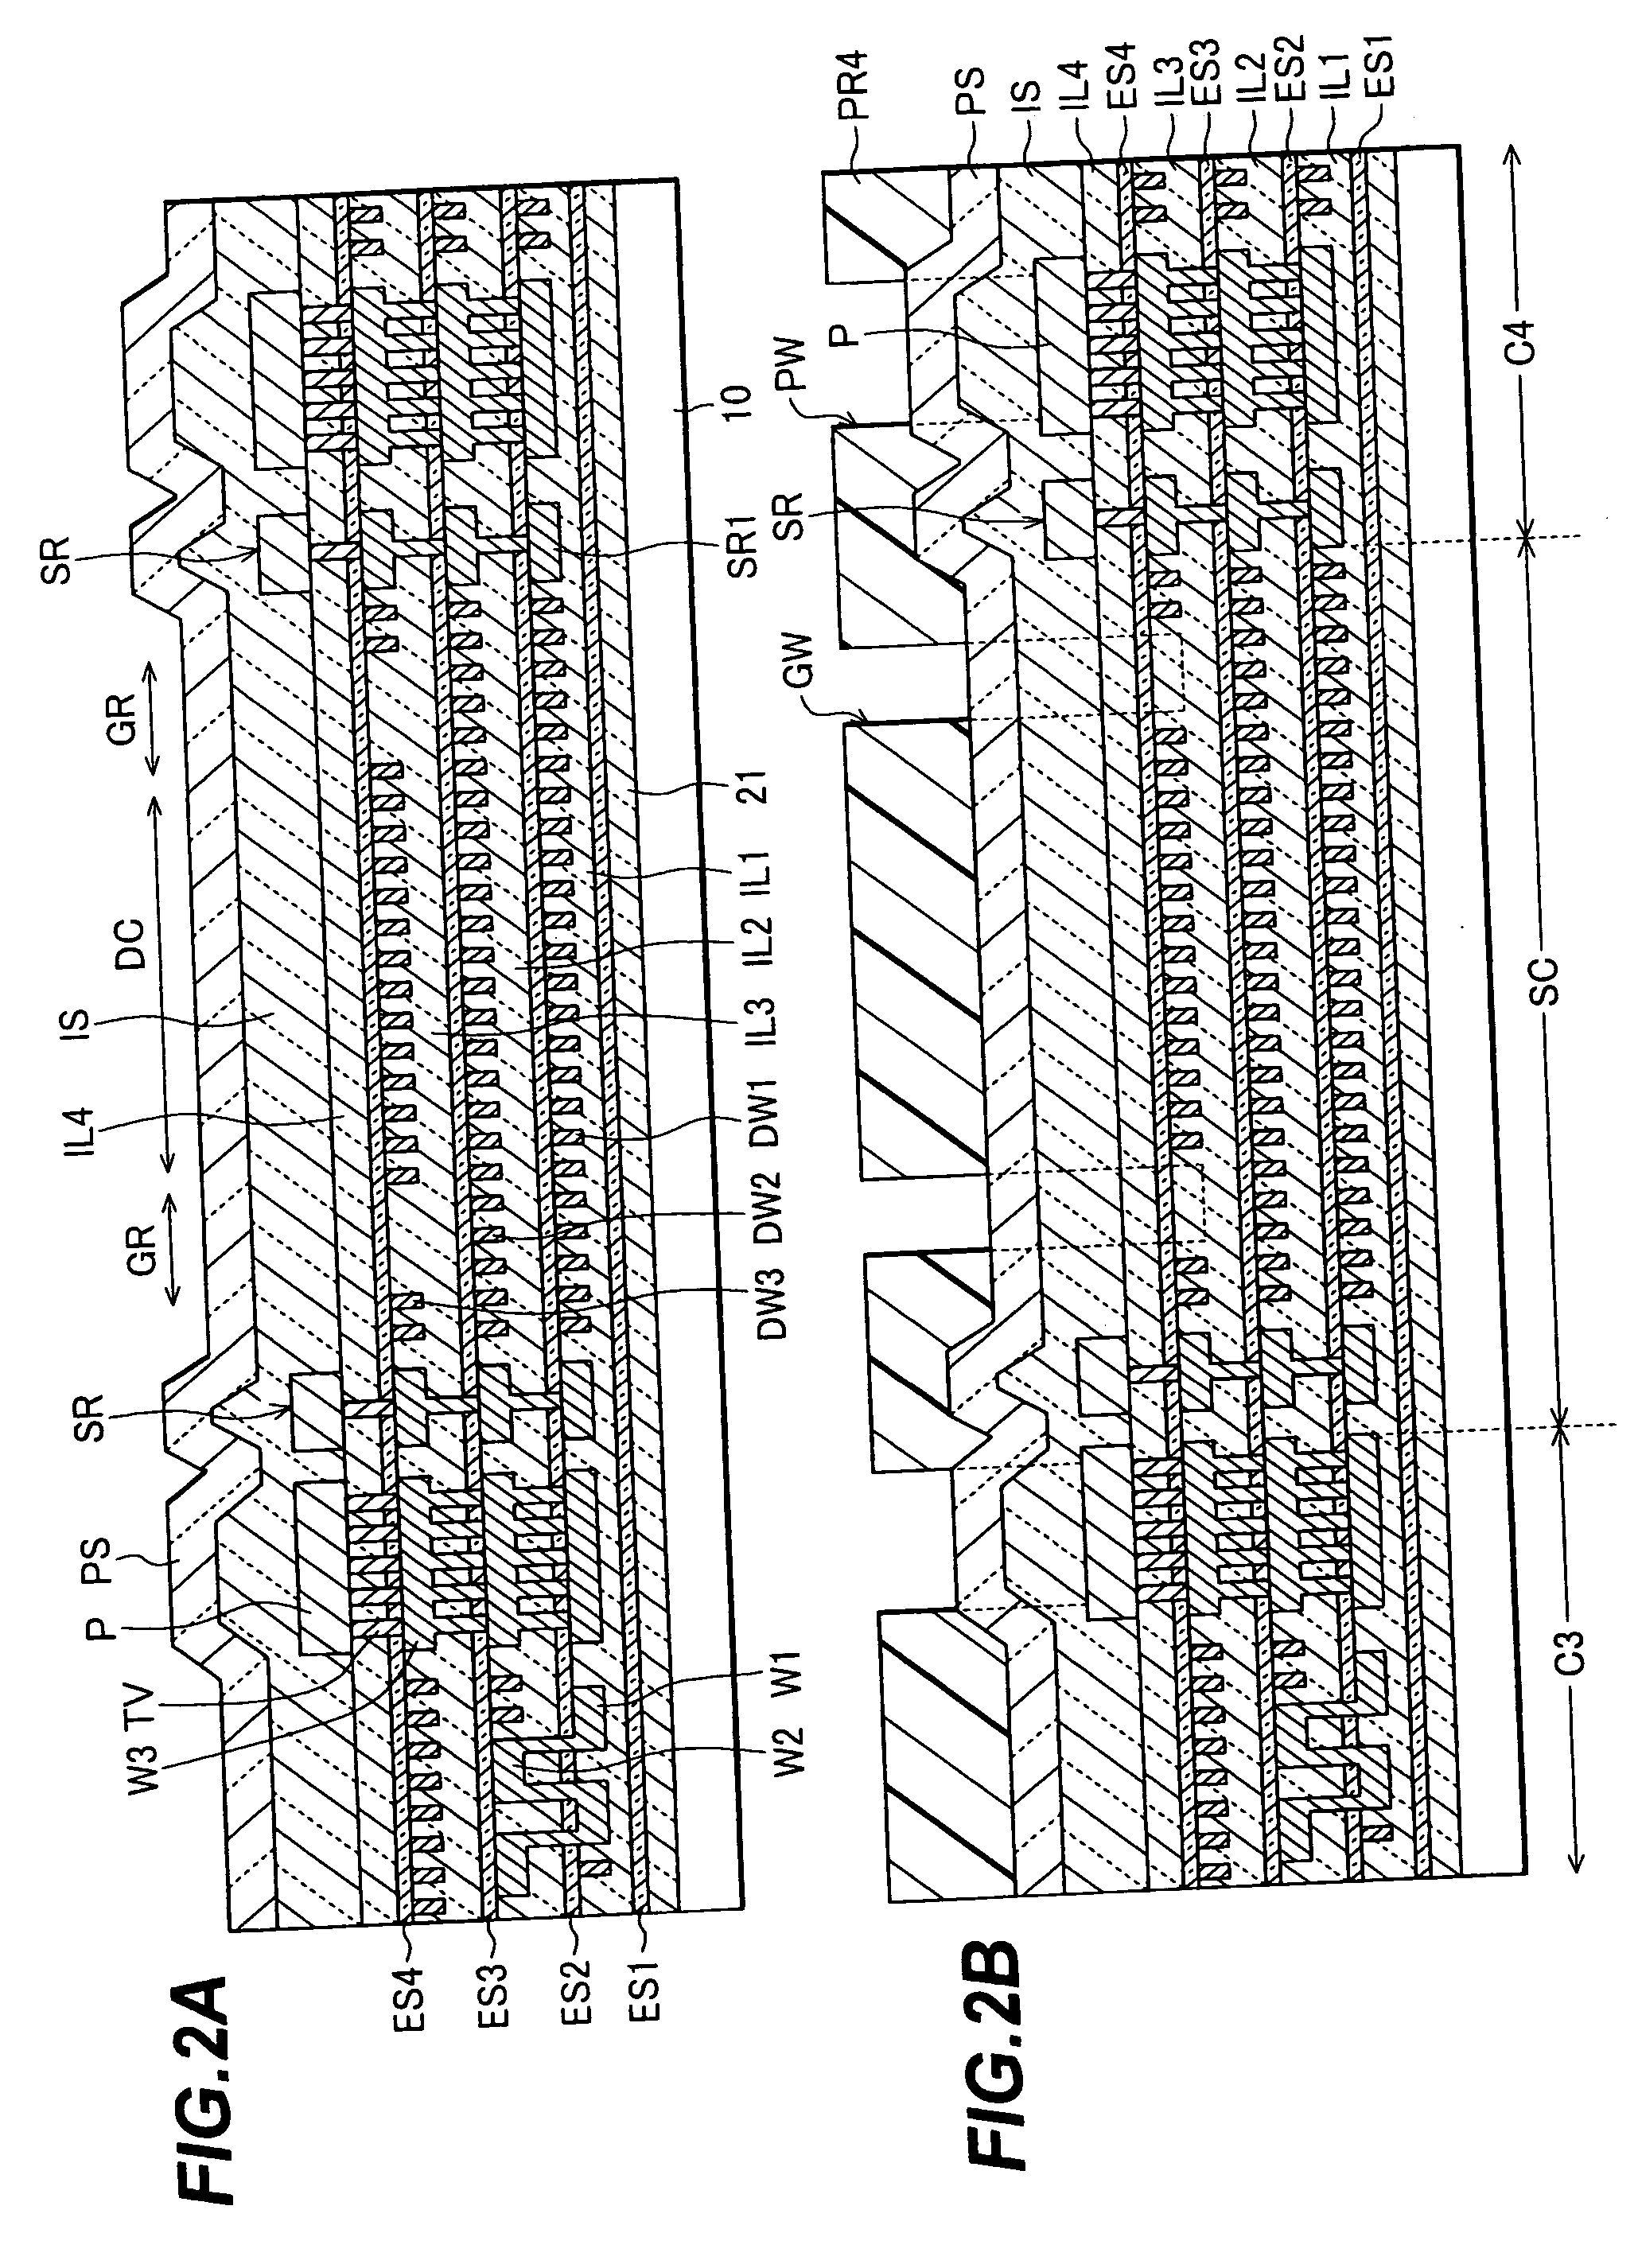 Method for fabricating semiconductor device capable of scribing chips with high yield